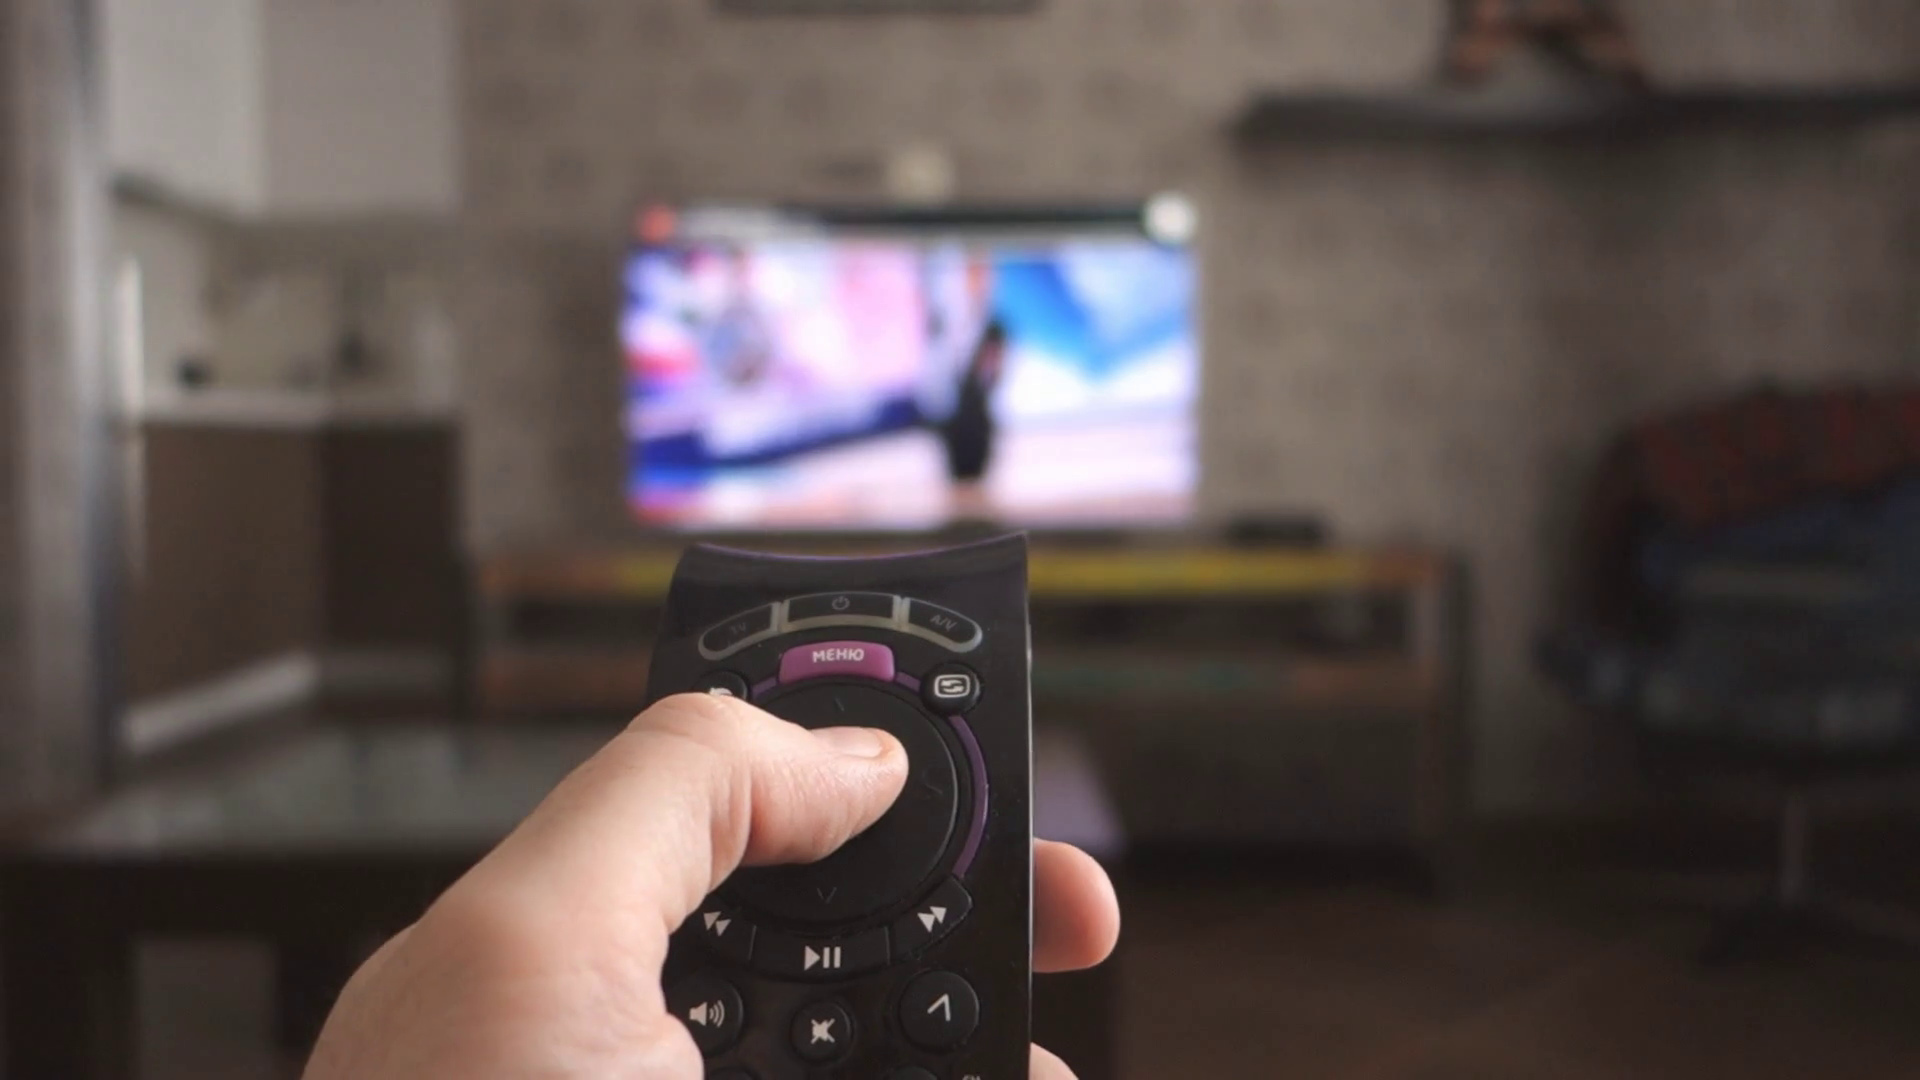 videoblocks-male-hand-holding-the-tv-remote-control-and-turn-off-smart-tv-channel-surfing-focused-on-the-hand-and-remote-control-internet-tv_bgzrxmgeie_thumbnail-full01